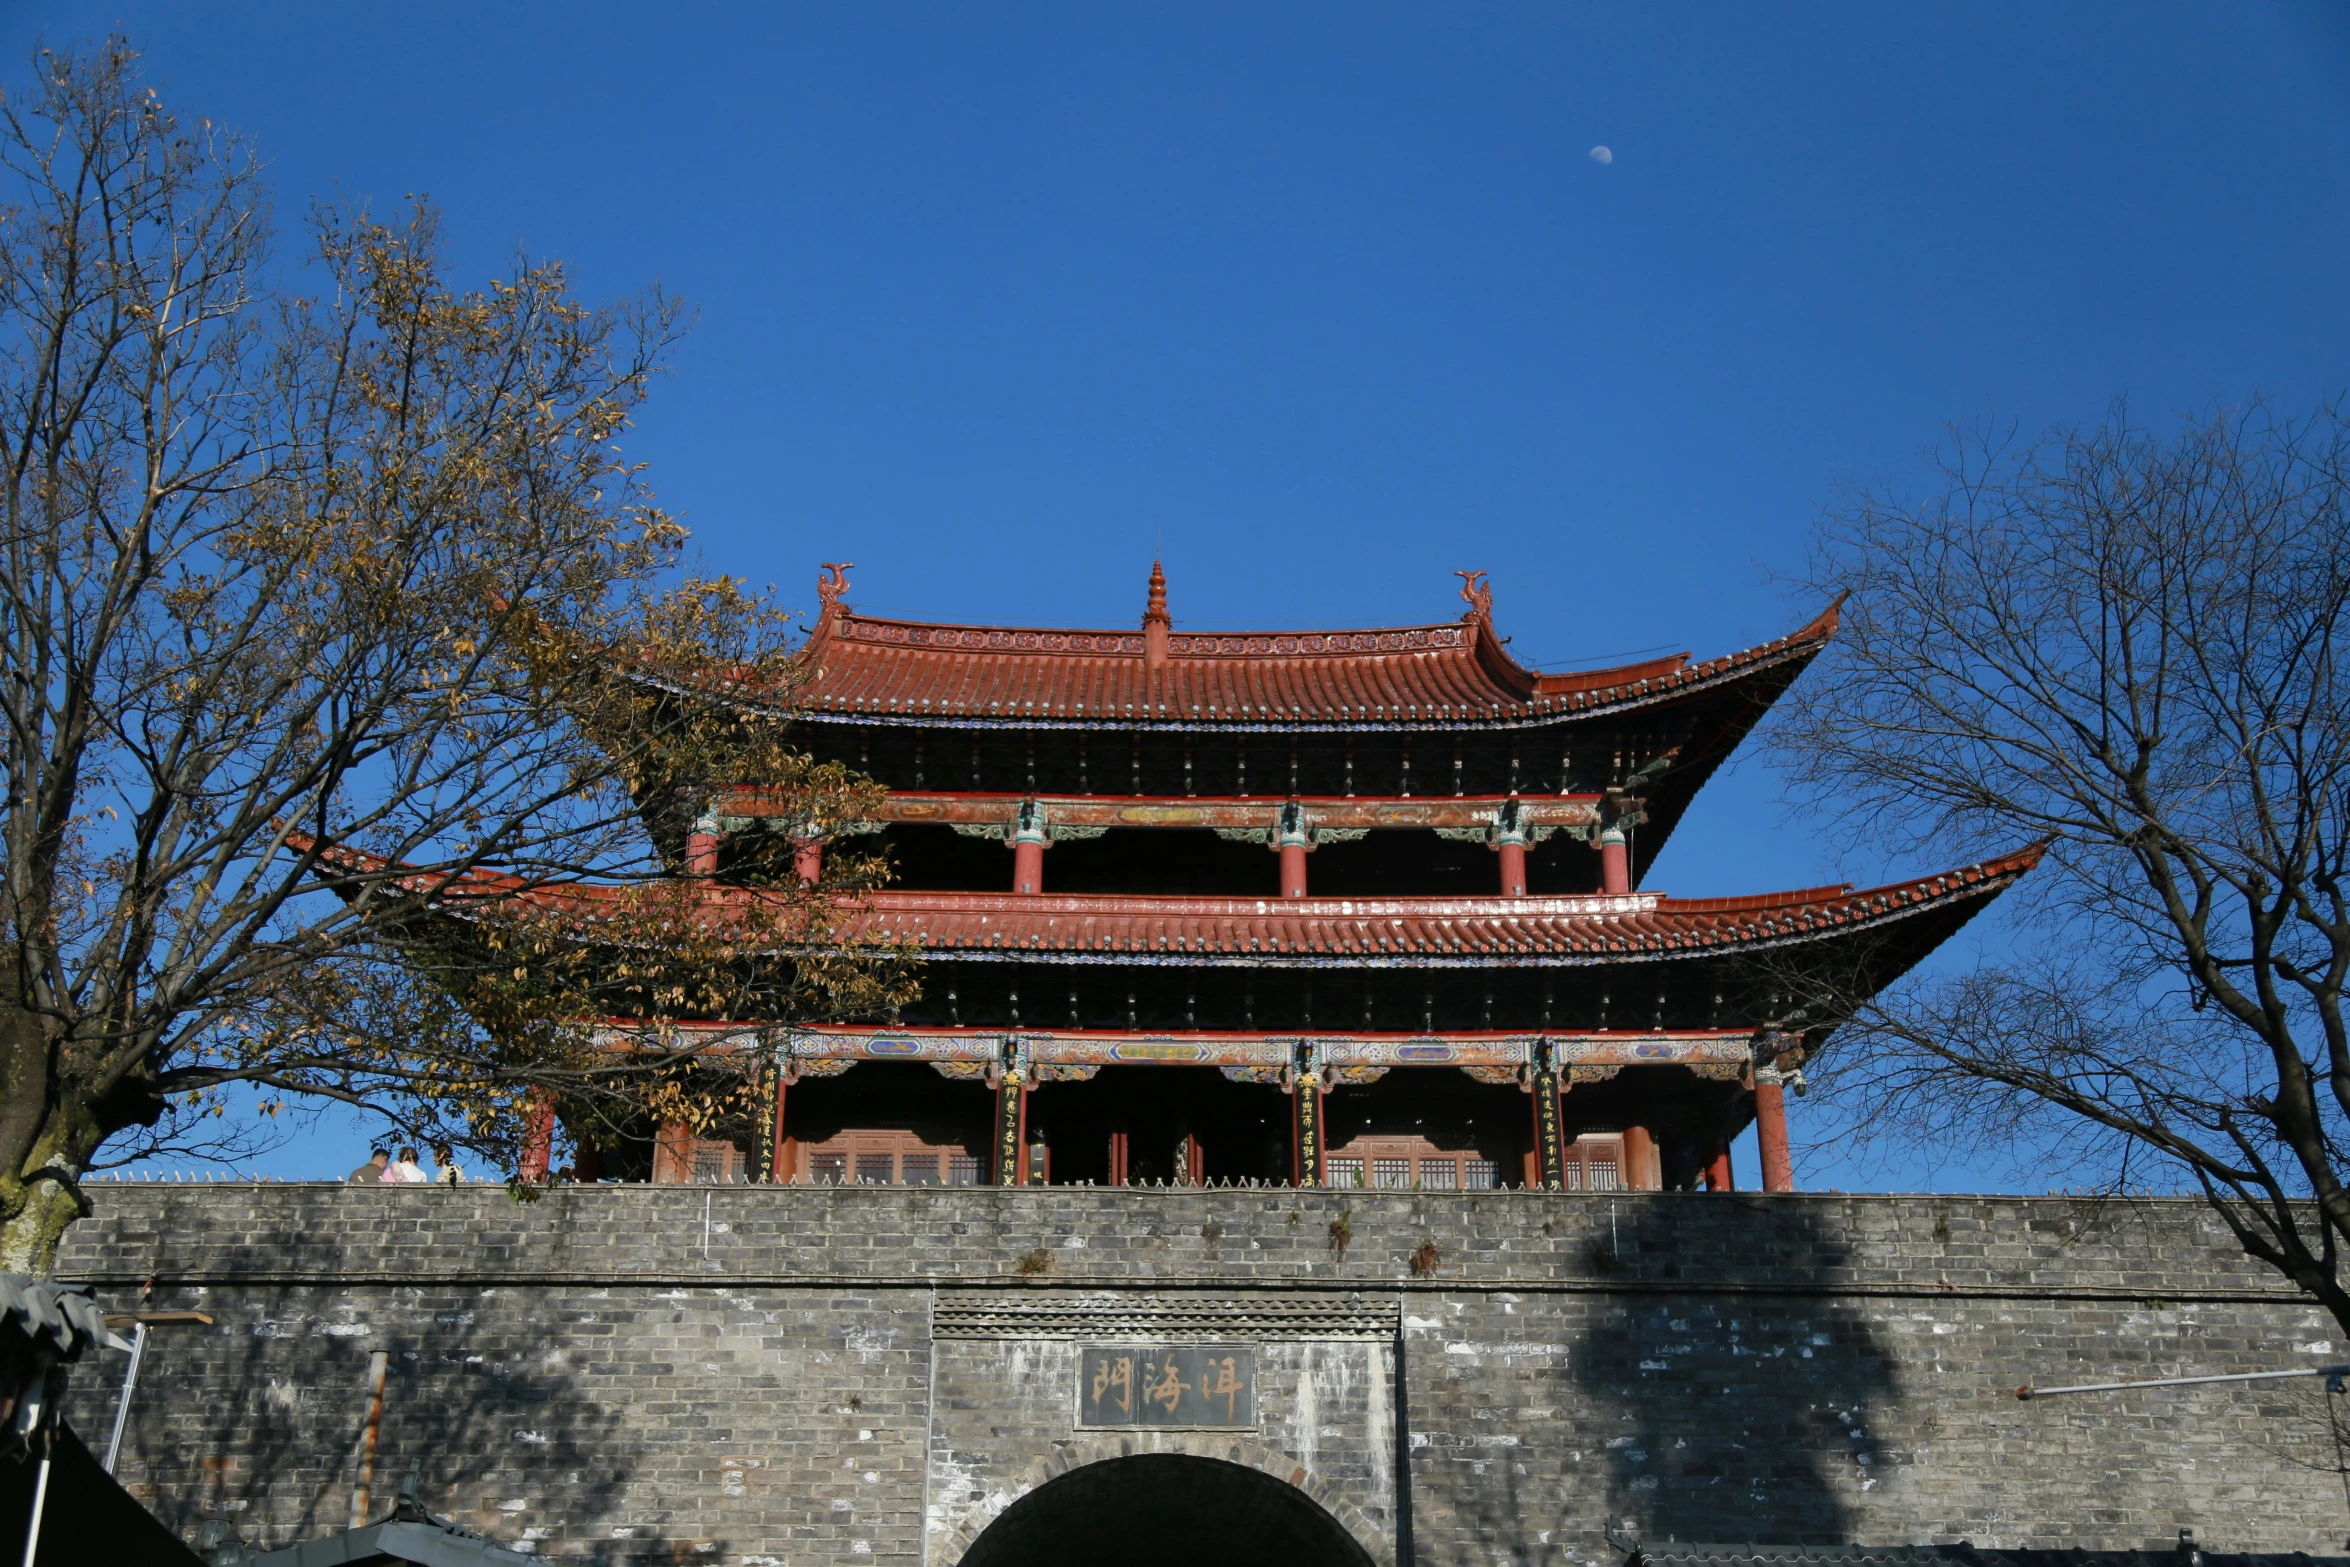 the pagoda stands near an ancient wall with trees in front